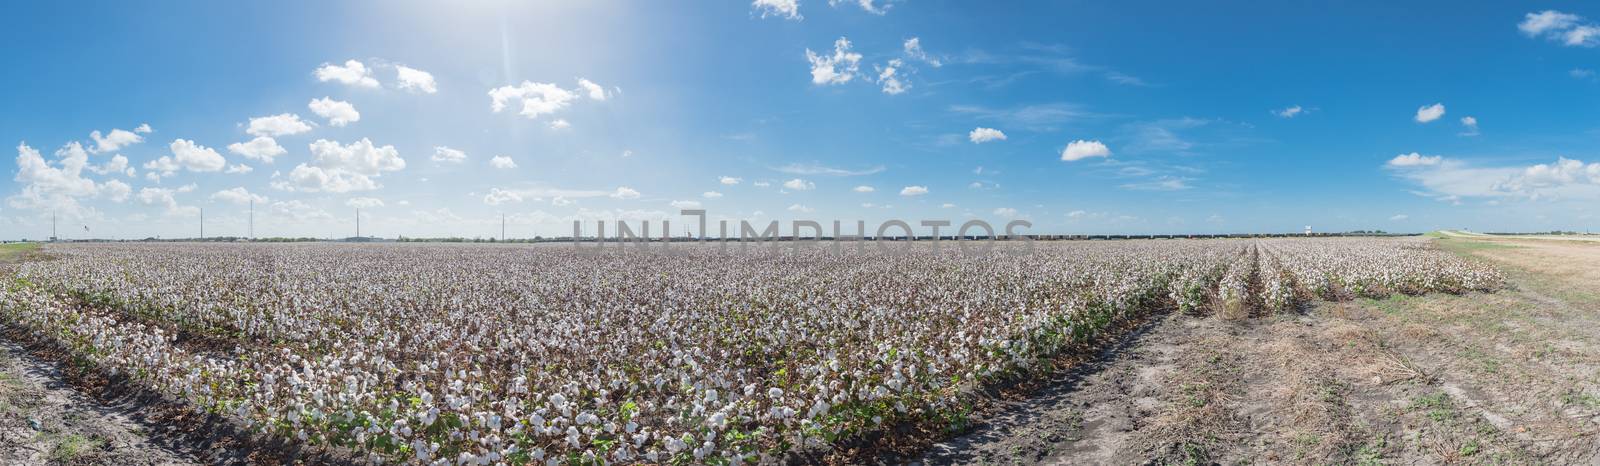 Panorama view cotton field ready to harvest in South Texas, America. Agriculture background